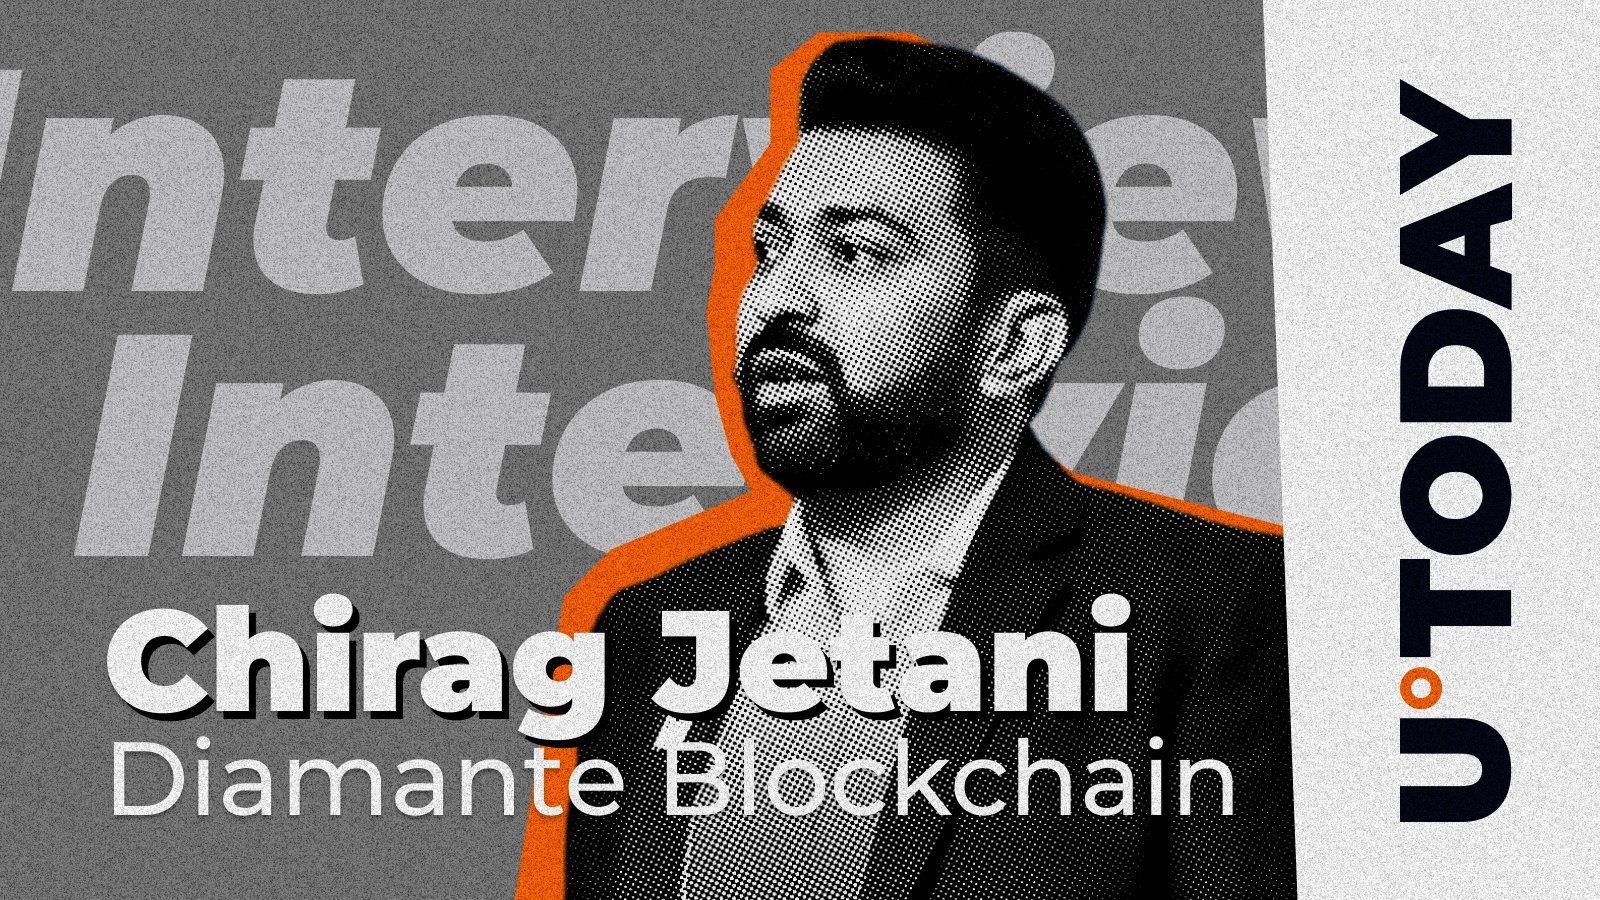 Inside Diamante Blockchain: High TPS, Royal Family Partnership and Cutting-Edge Adoption of Blockchain and AI: Interview With Founder and COO Chirag Jetani